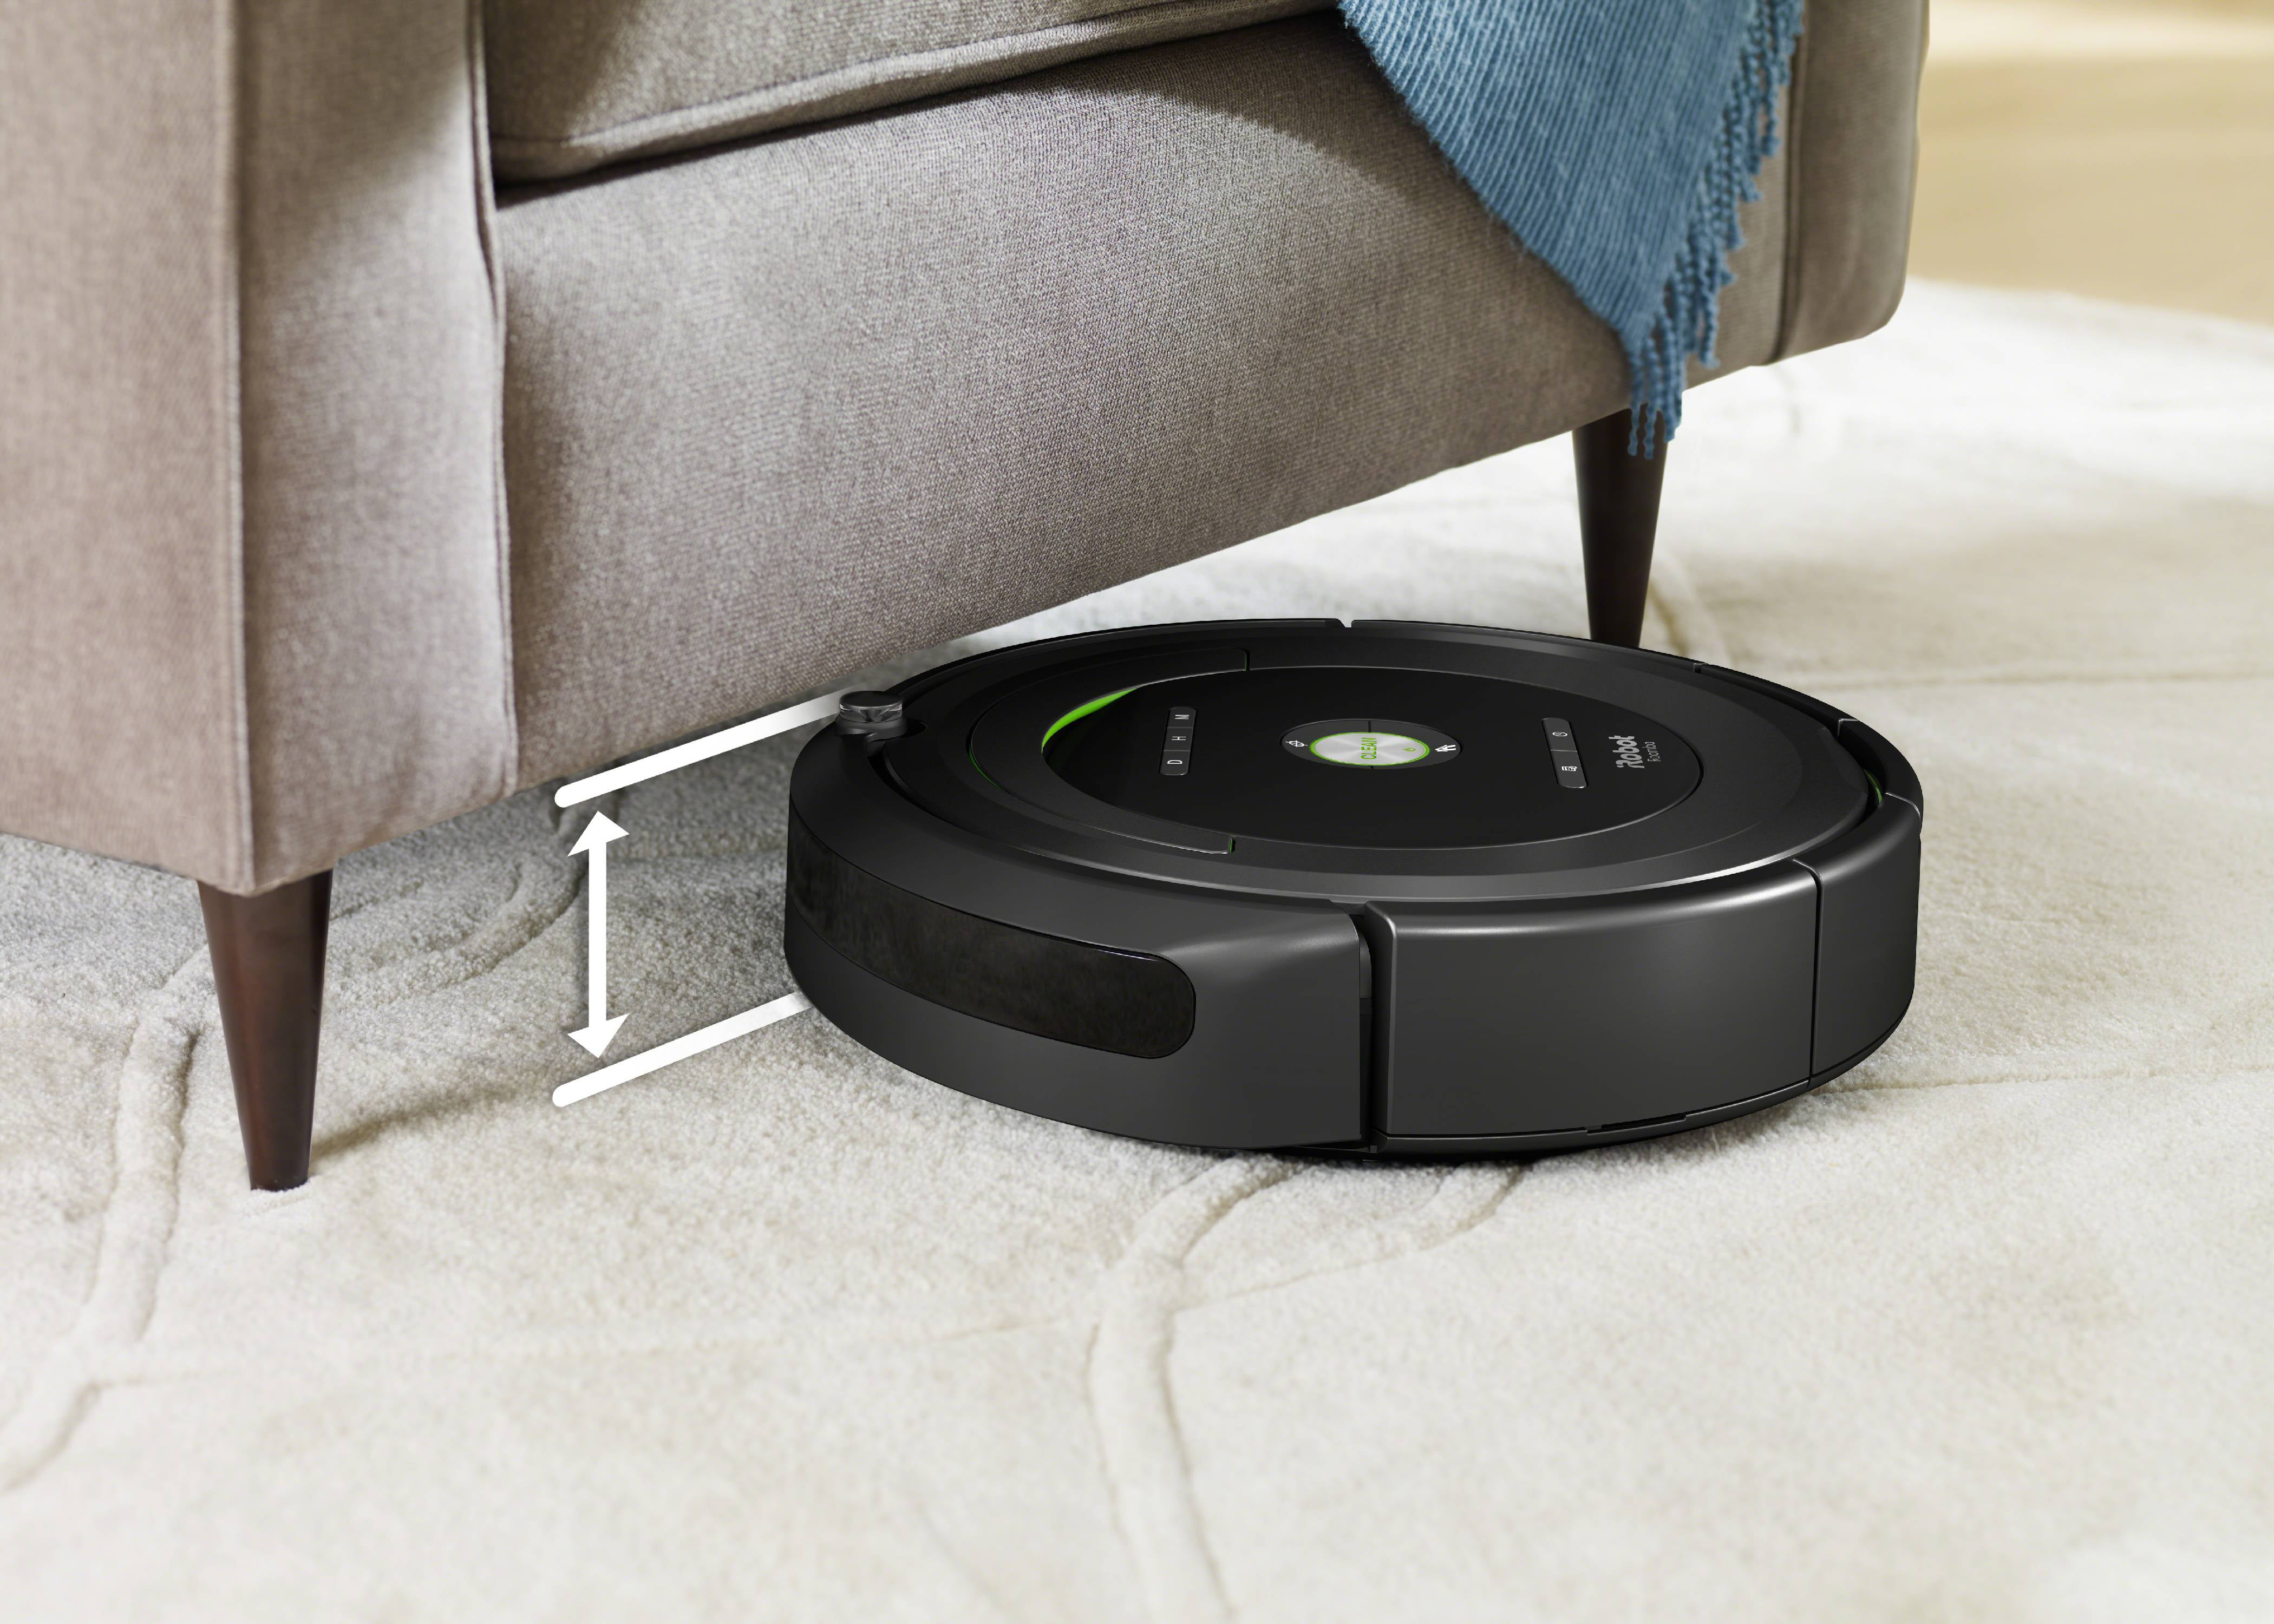 Roomba by iRobot Robot with Manufacturer's Warranty -